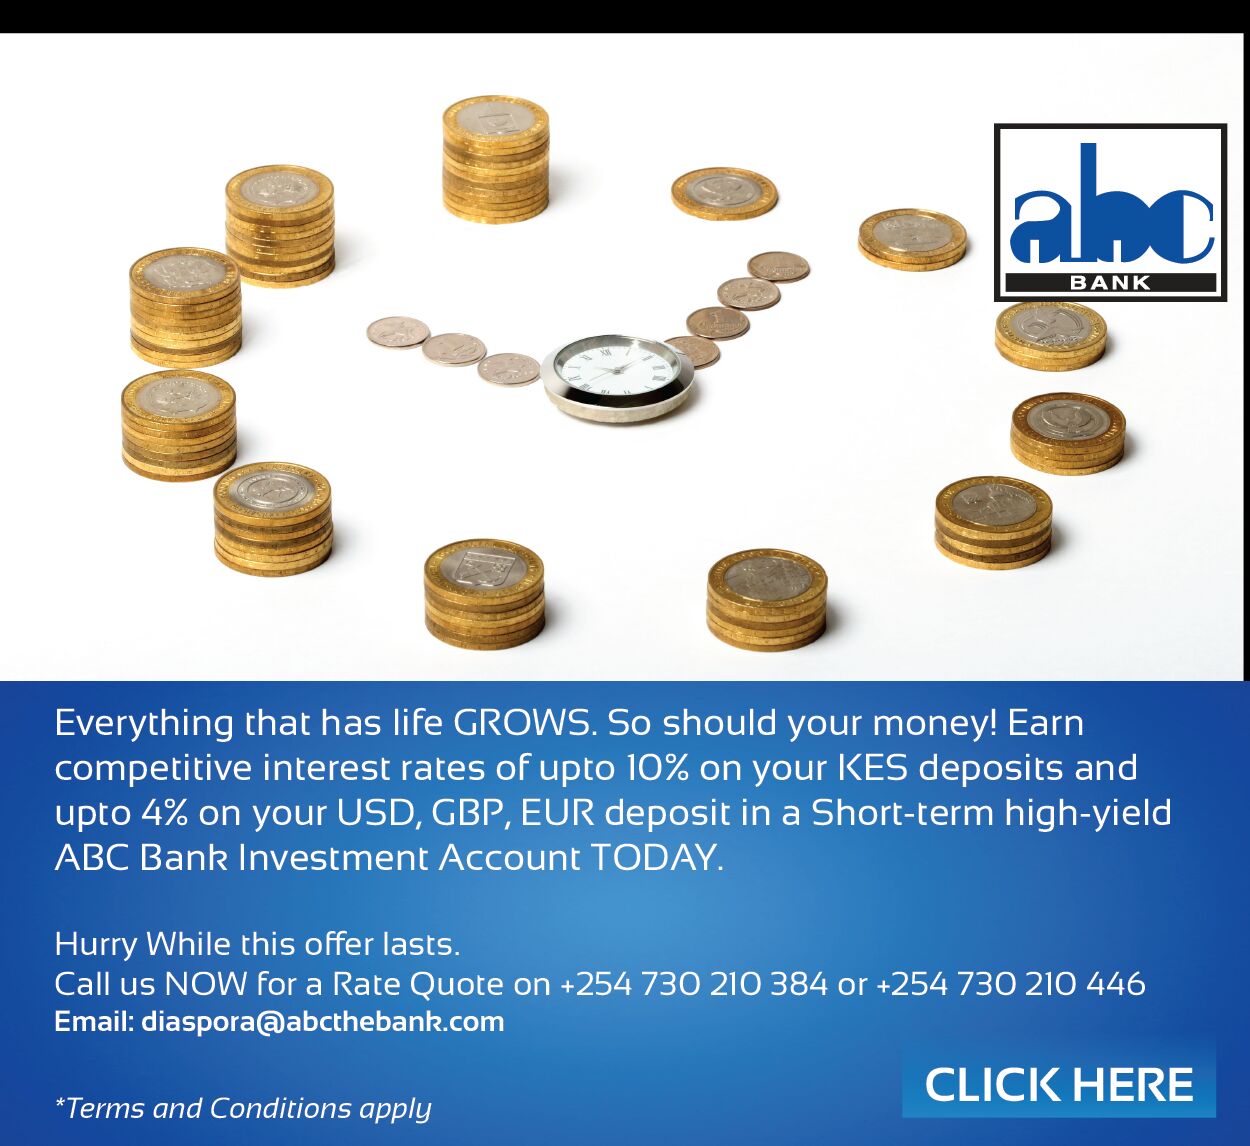 ABC Bank Investment Account